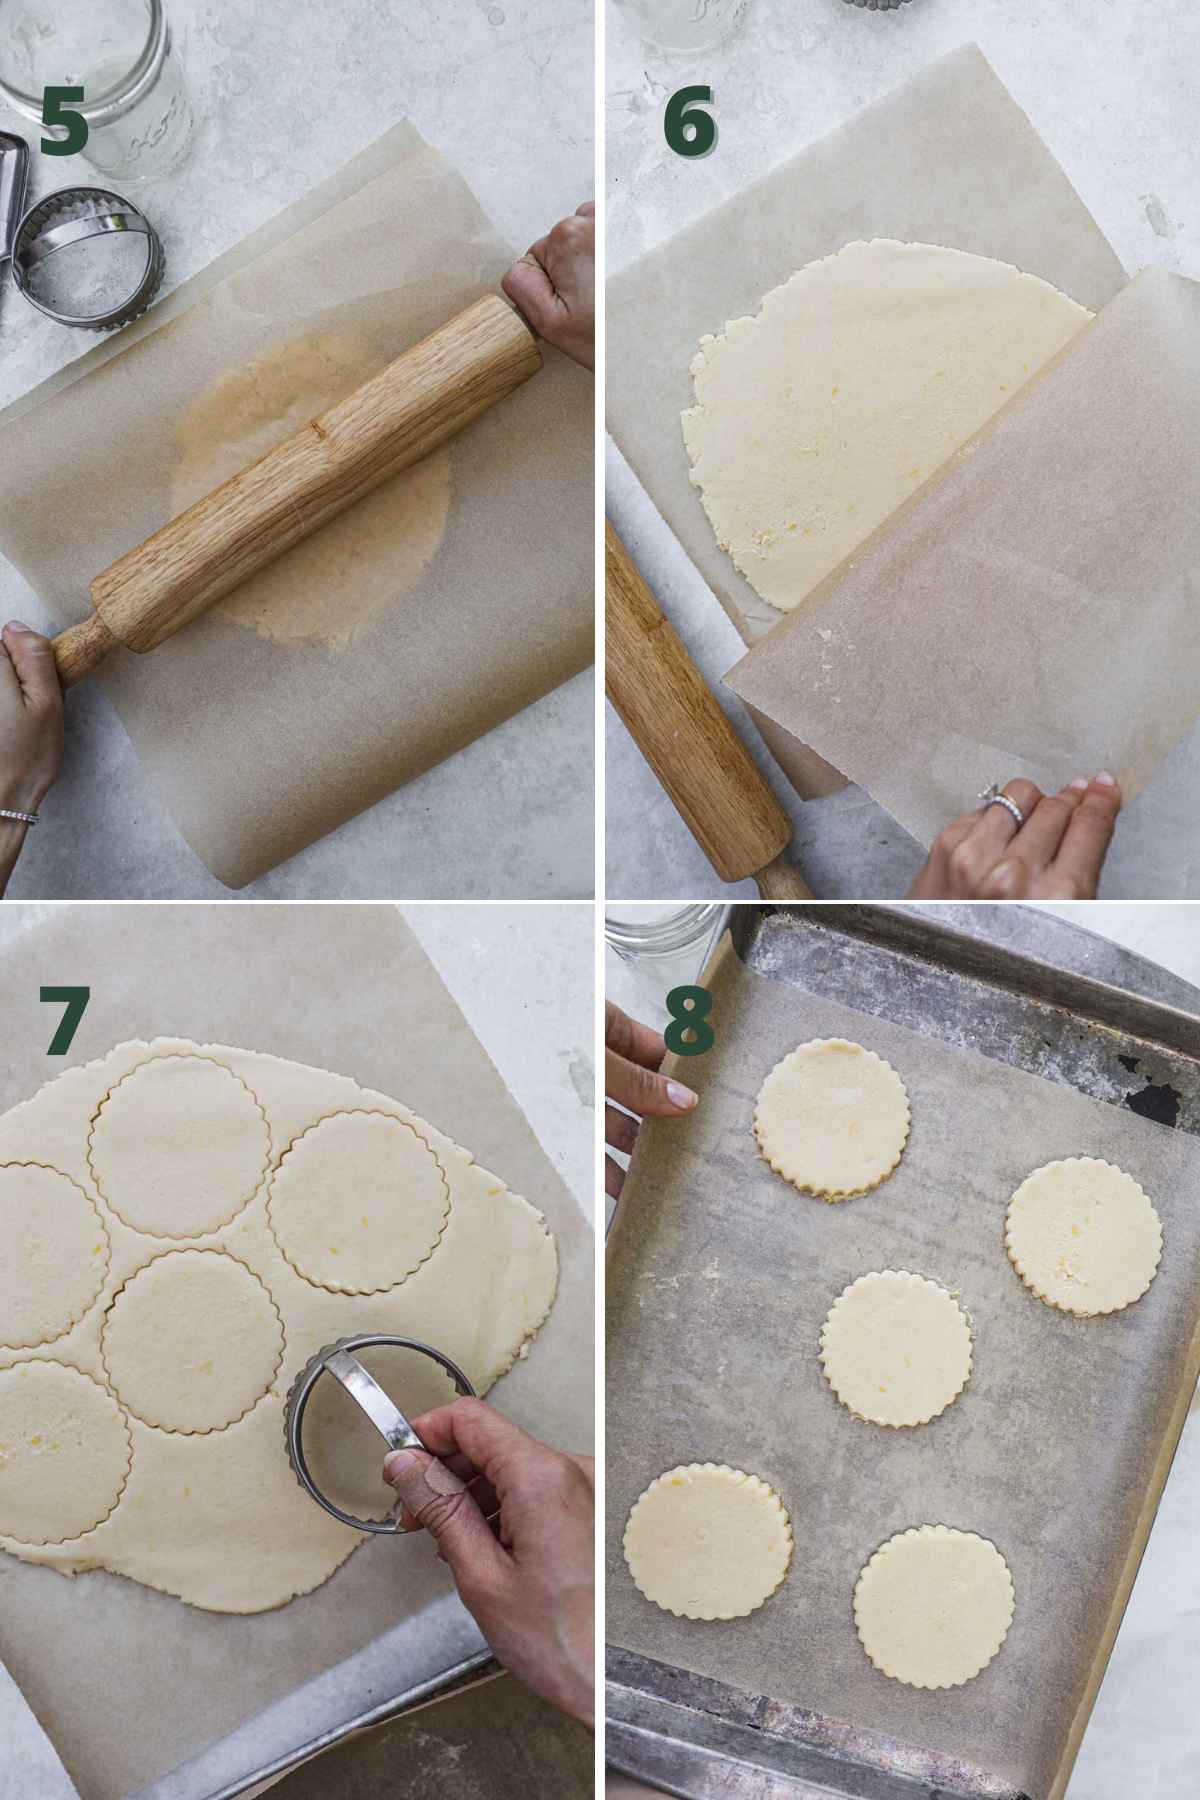 Steps to make lemon cookies with lemon glaze, rolling out the dough with parchment paper, chilling, cutting dough, and baking.